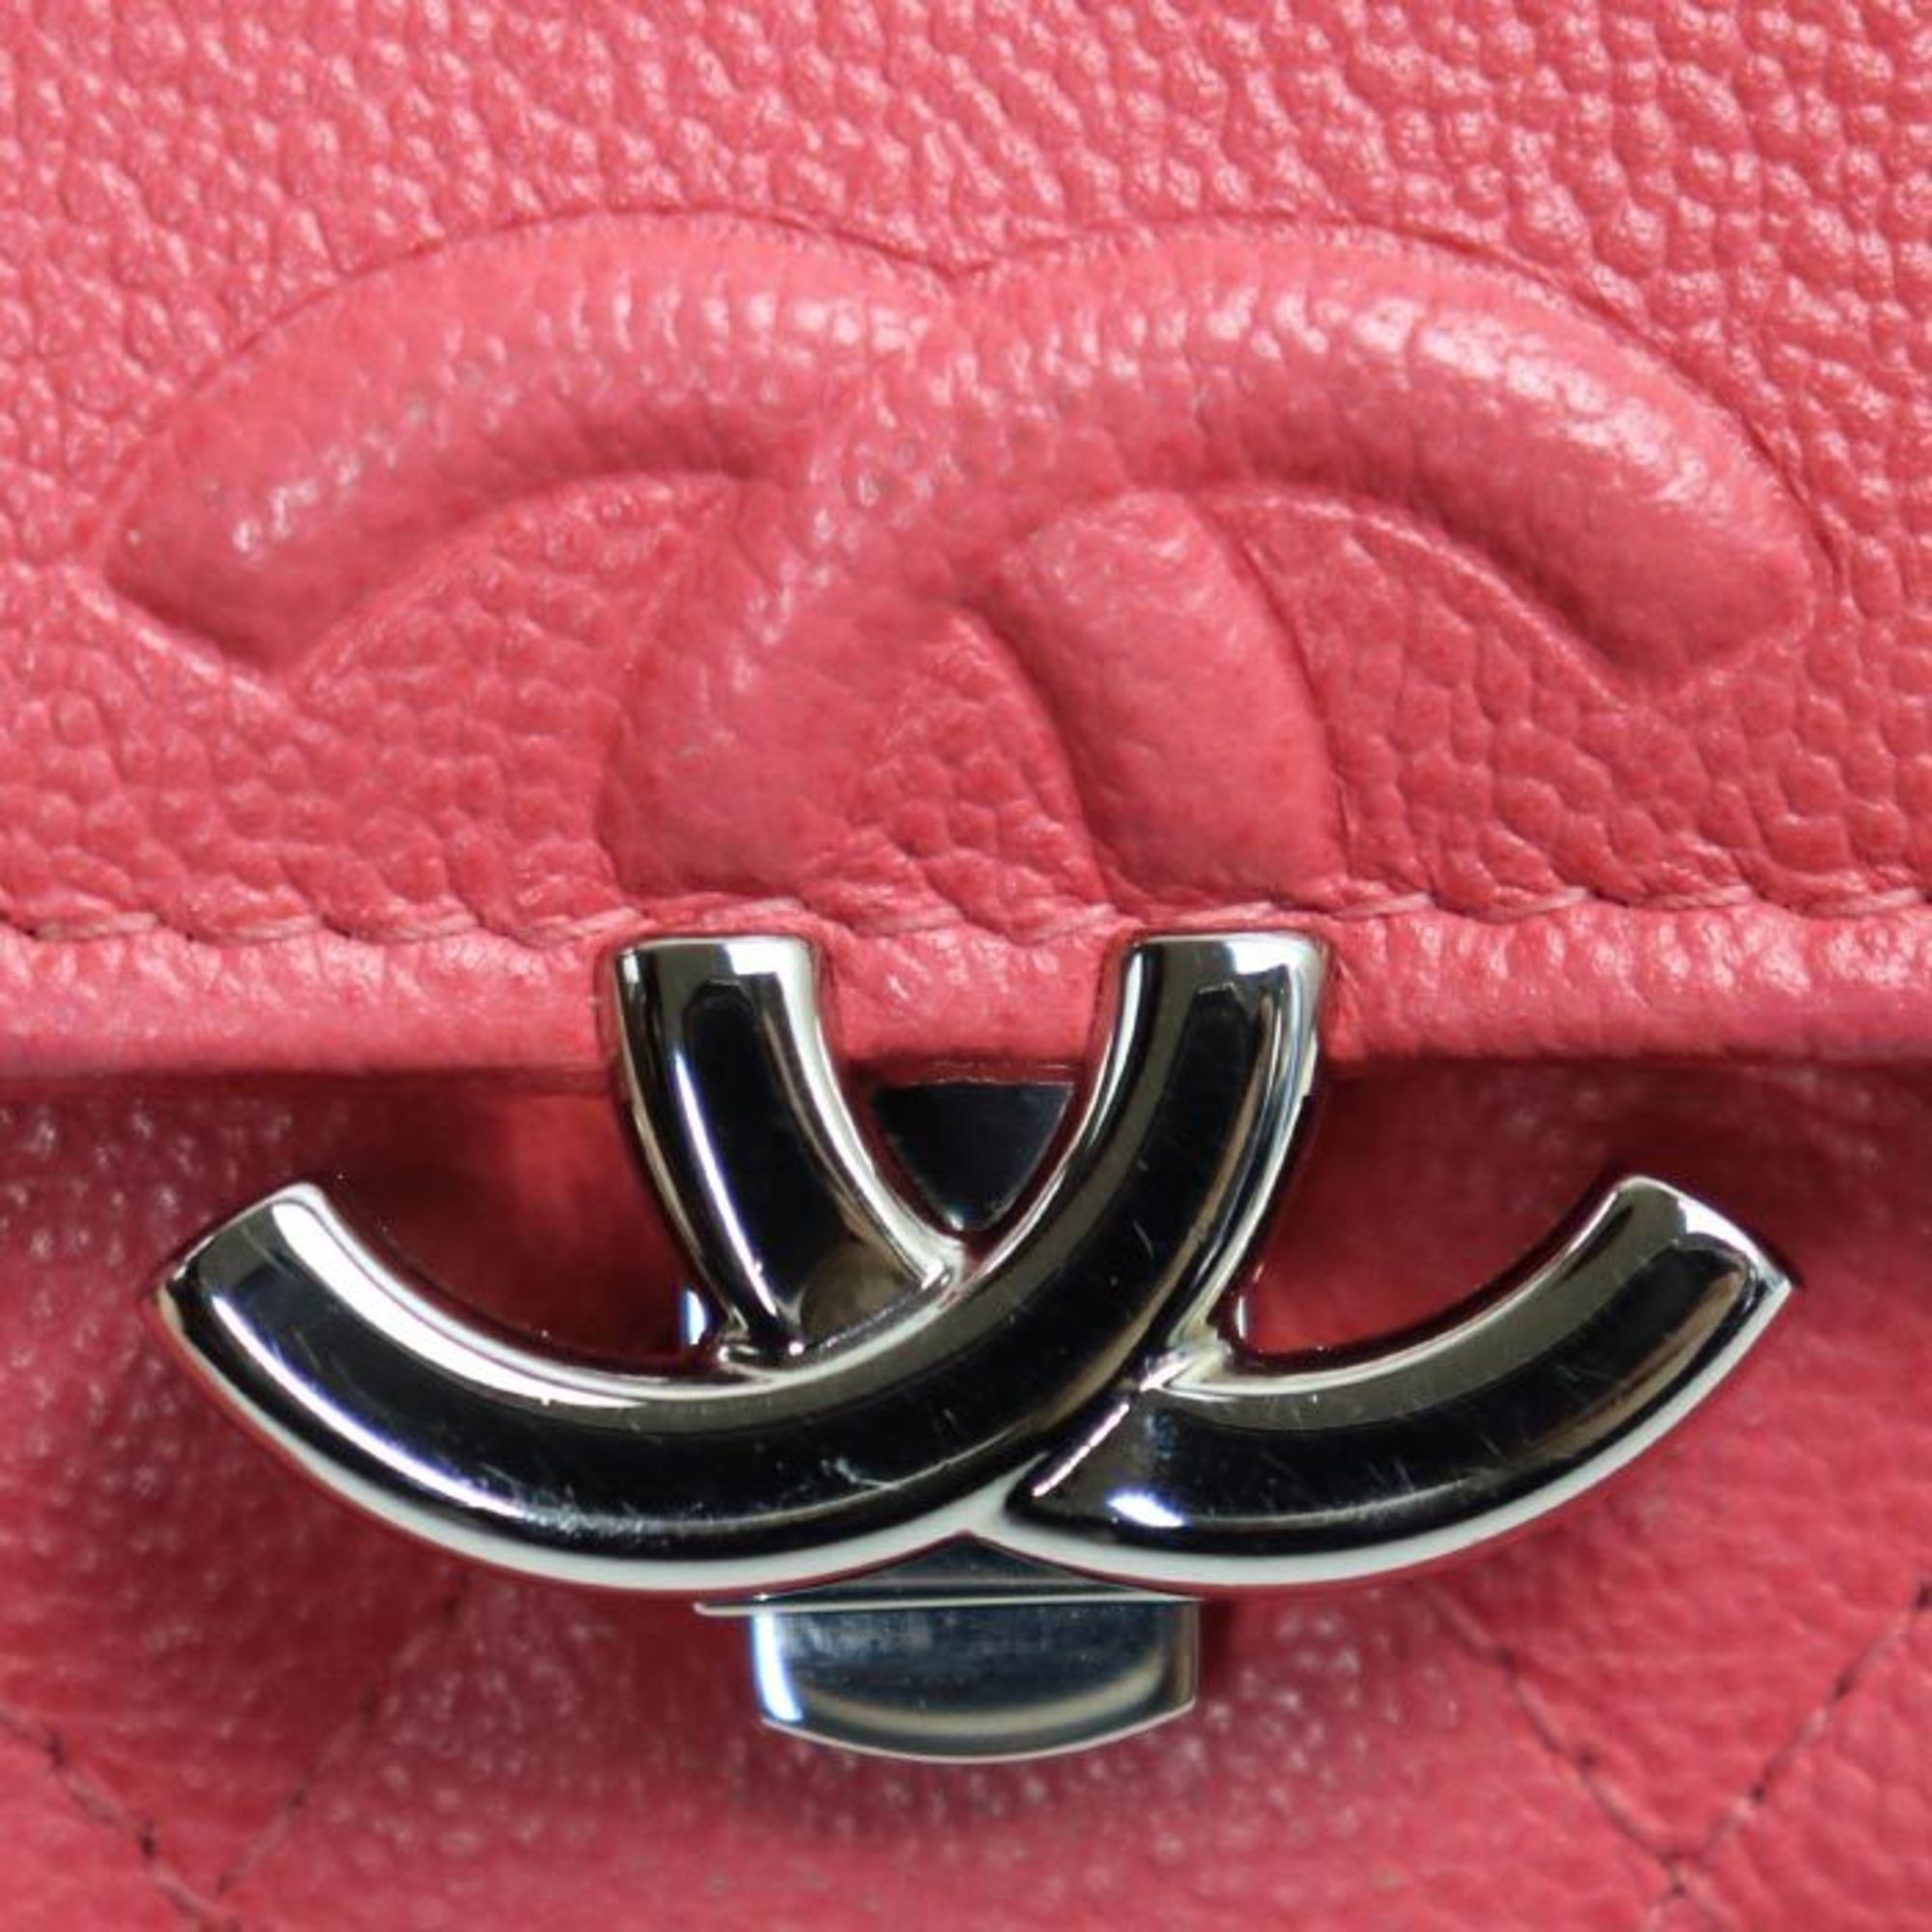 CHANEL Matelasse Small Flap Wallet Trifold Pink Ladies